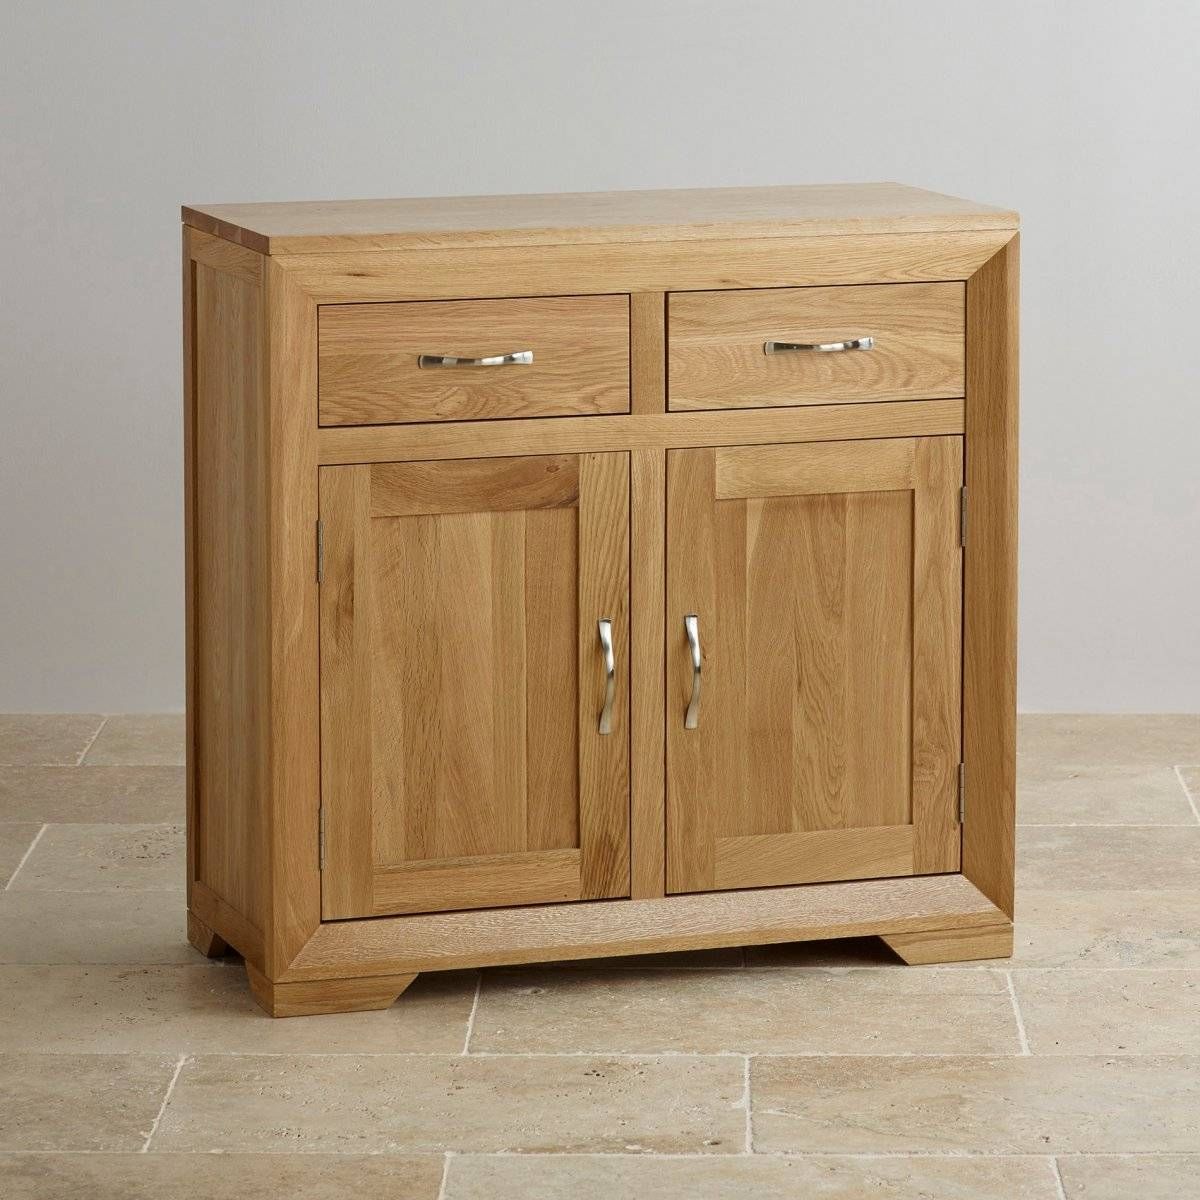 Sideboards | 100% Solid Hardwood | Oak Furniture Land For Small Wooden Sideboard (View 12 of 20)